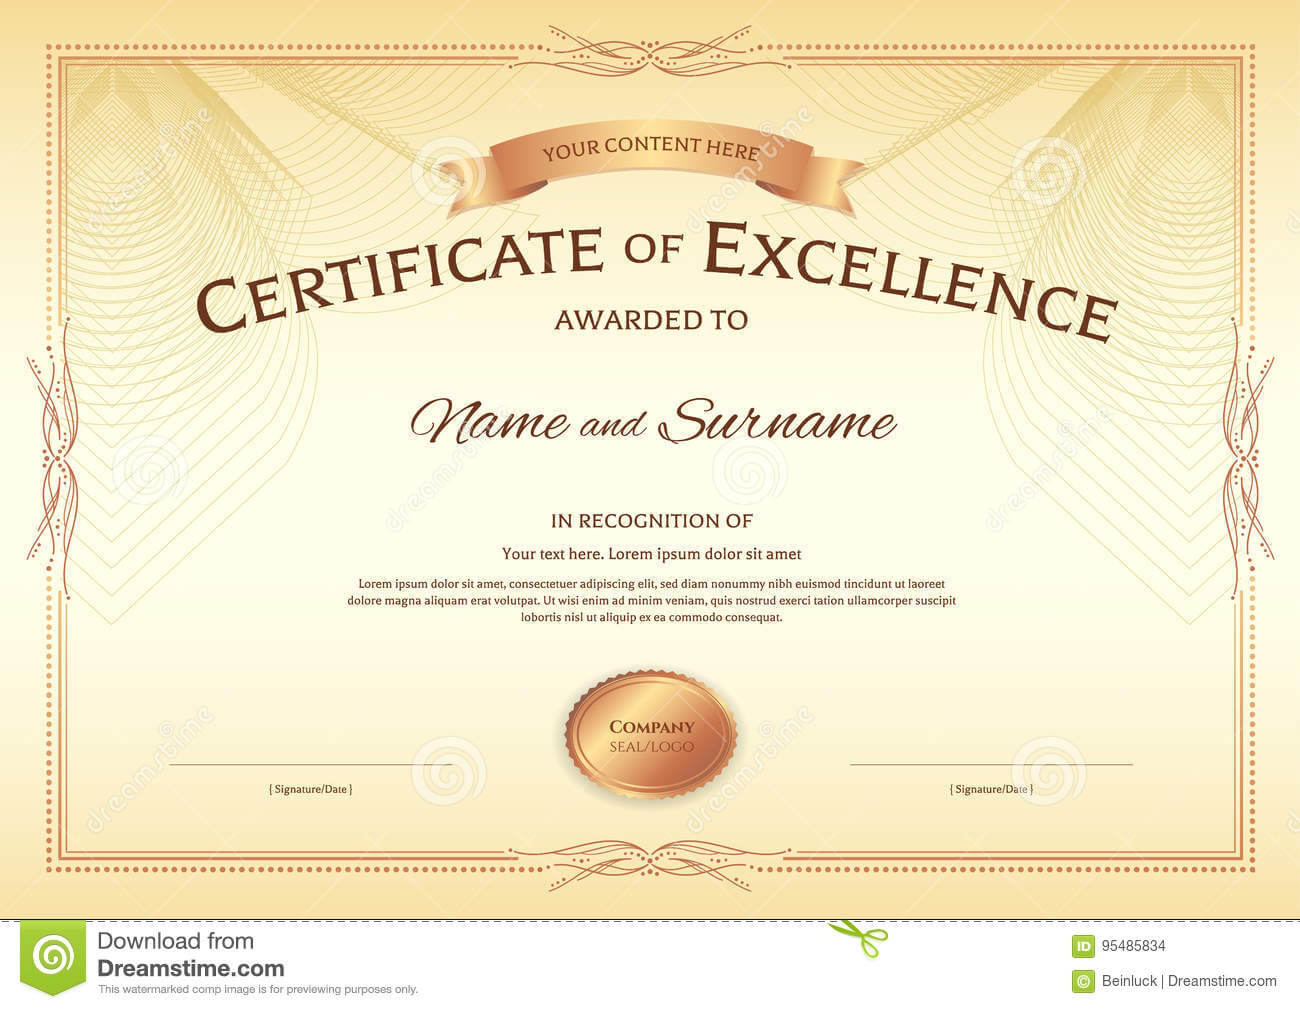 Certificate Of Excellence Template With Award Ribbon On For Award Of Excellence Certificate Template